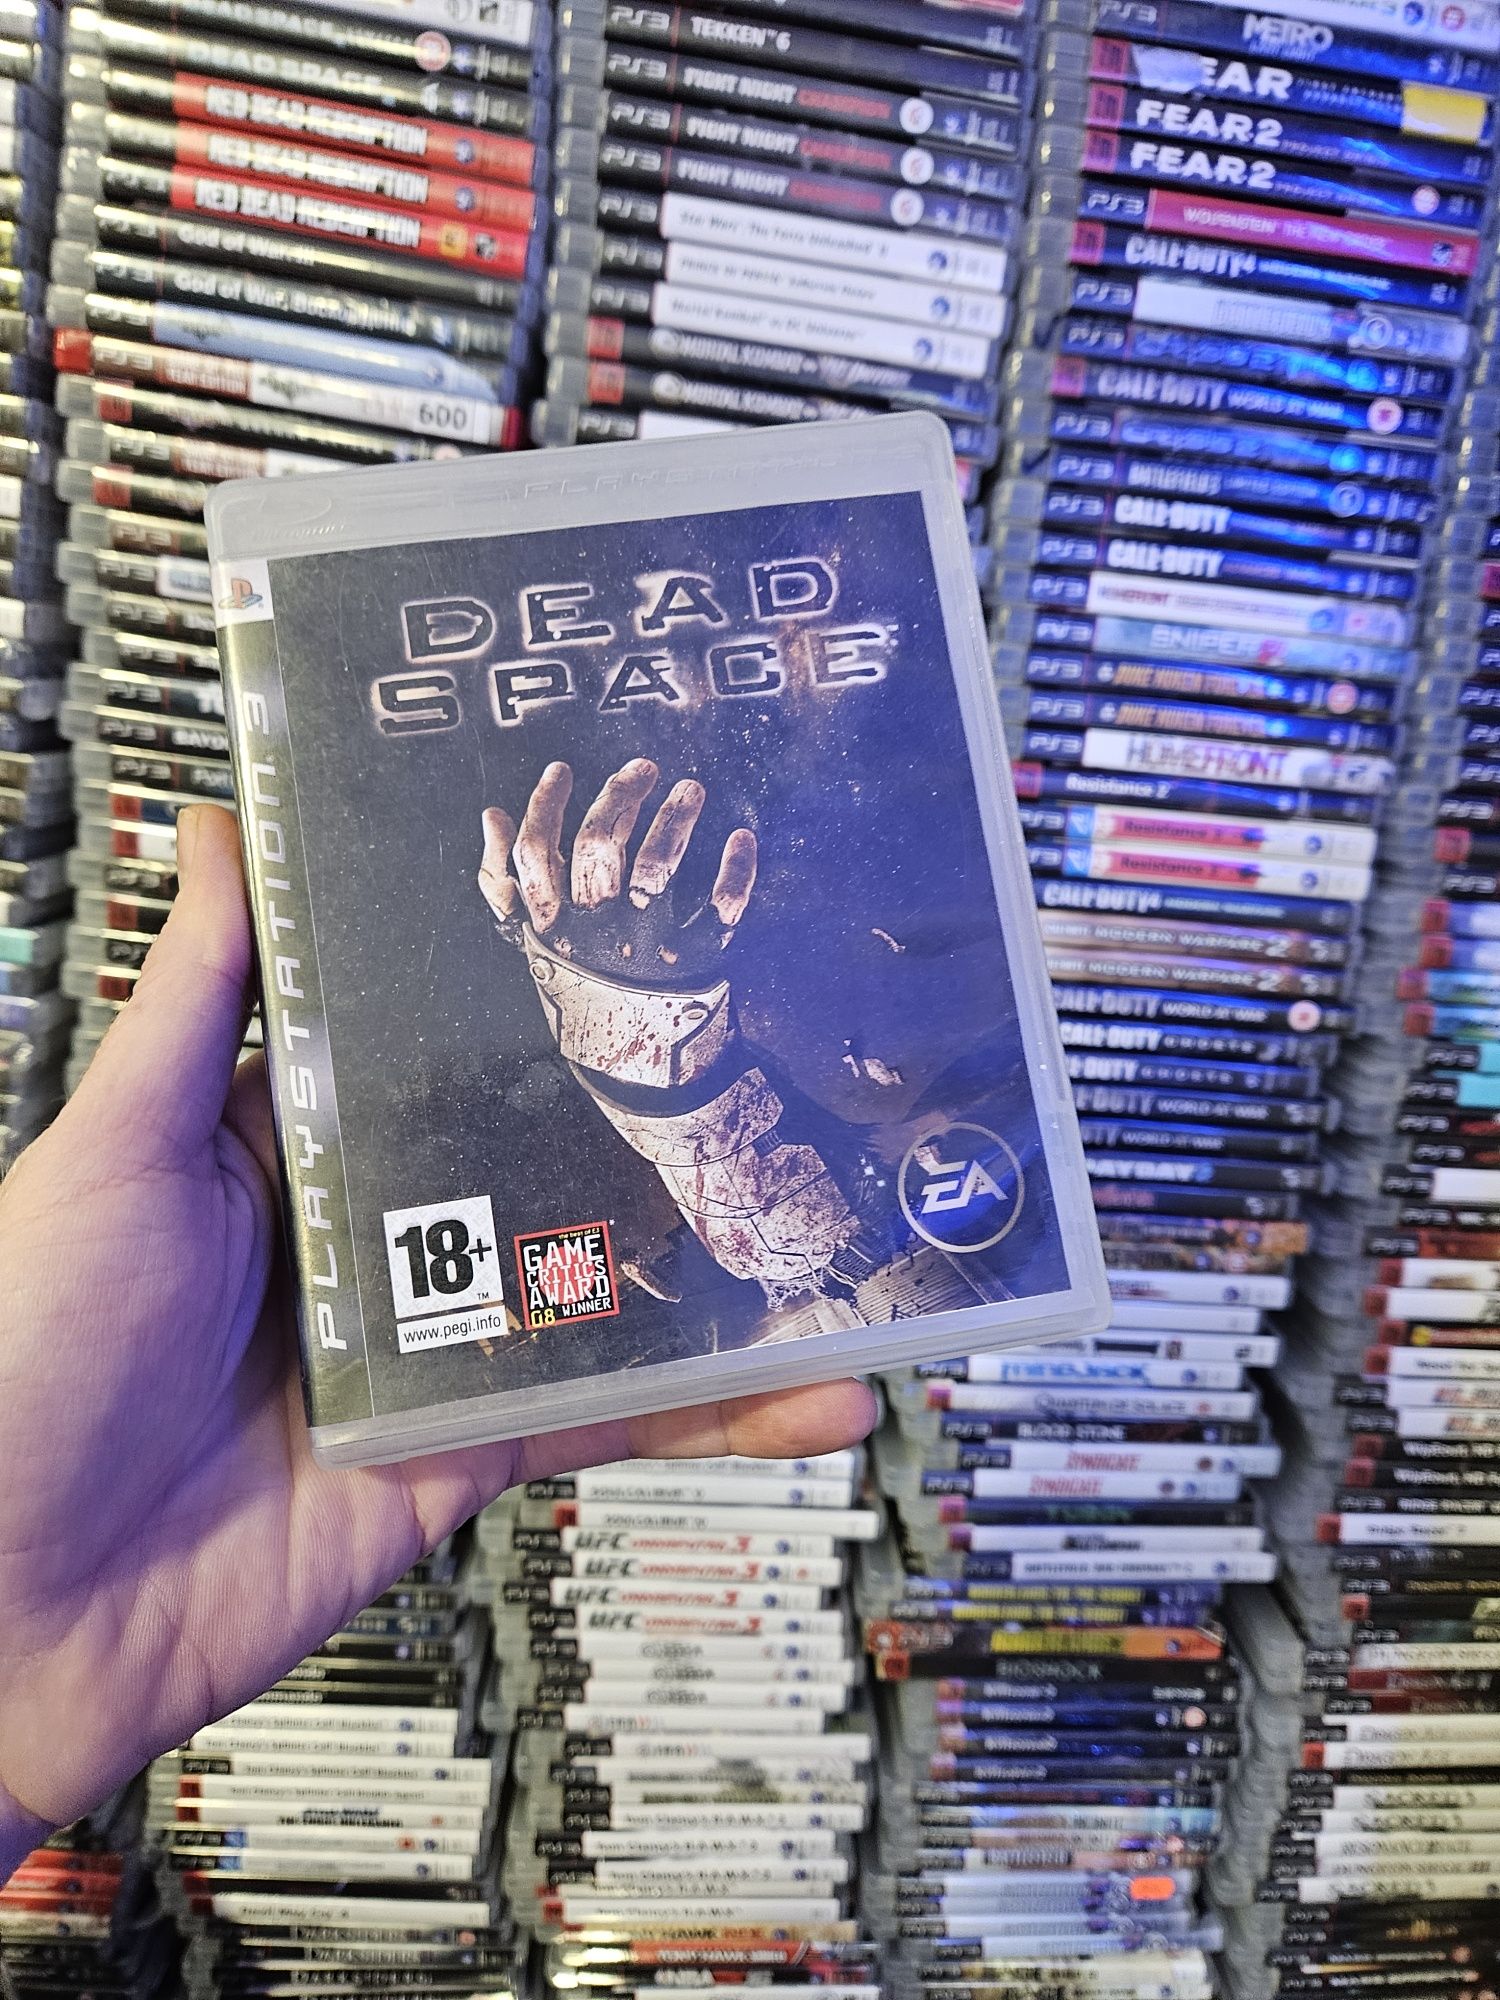 PS3 Sony Playstation 3 Dead Space б/у